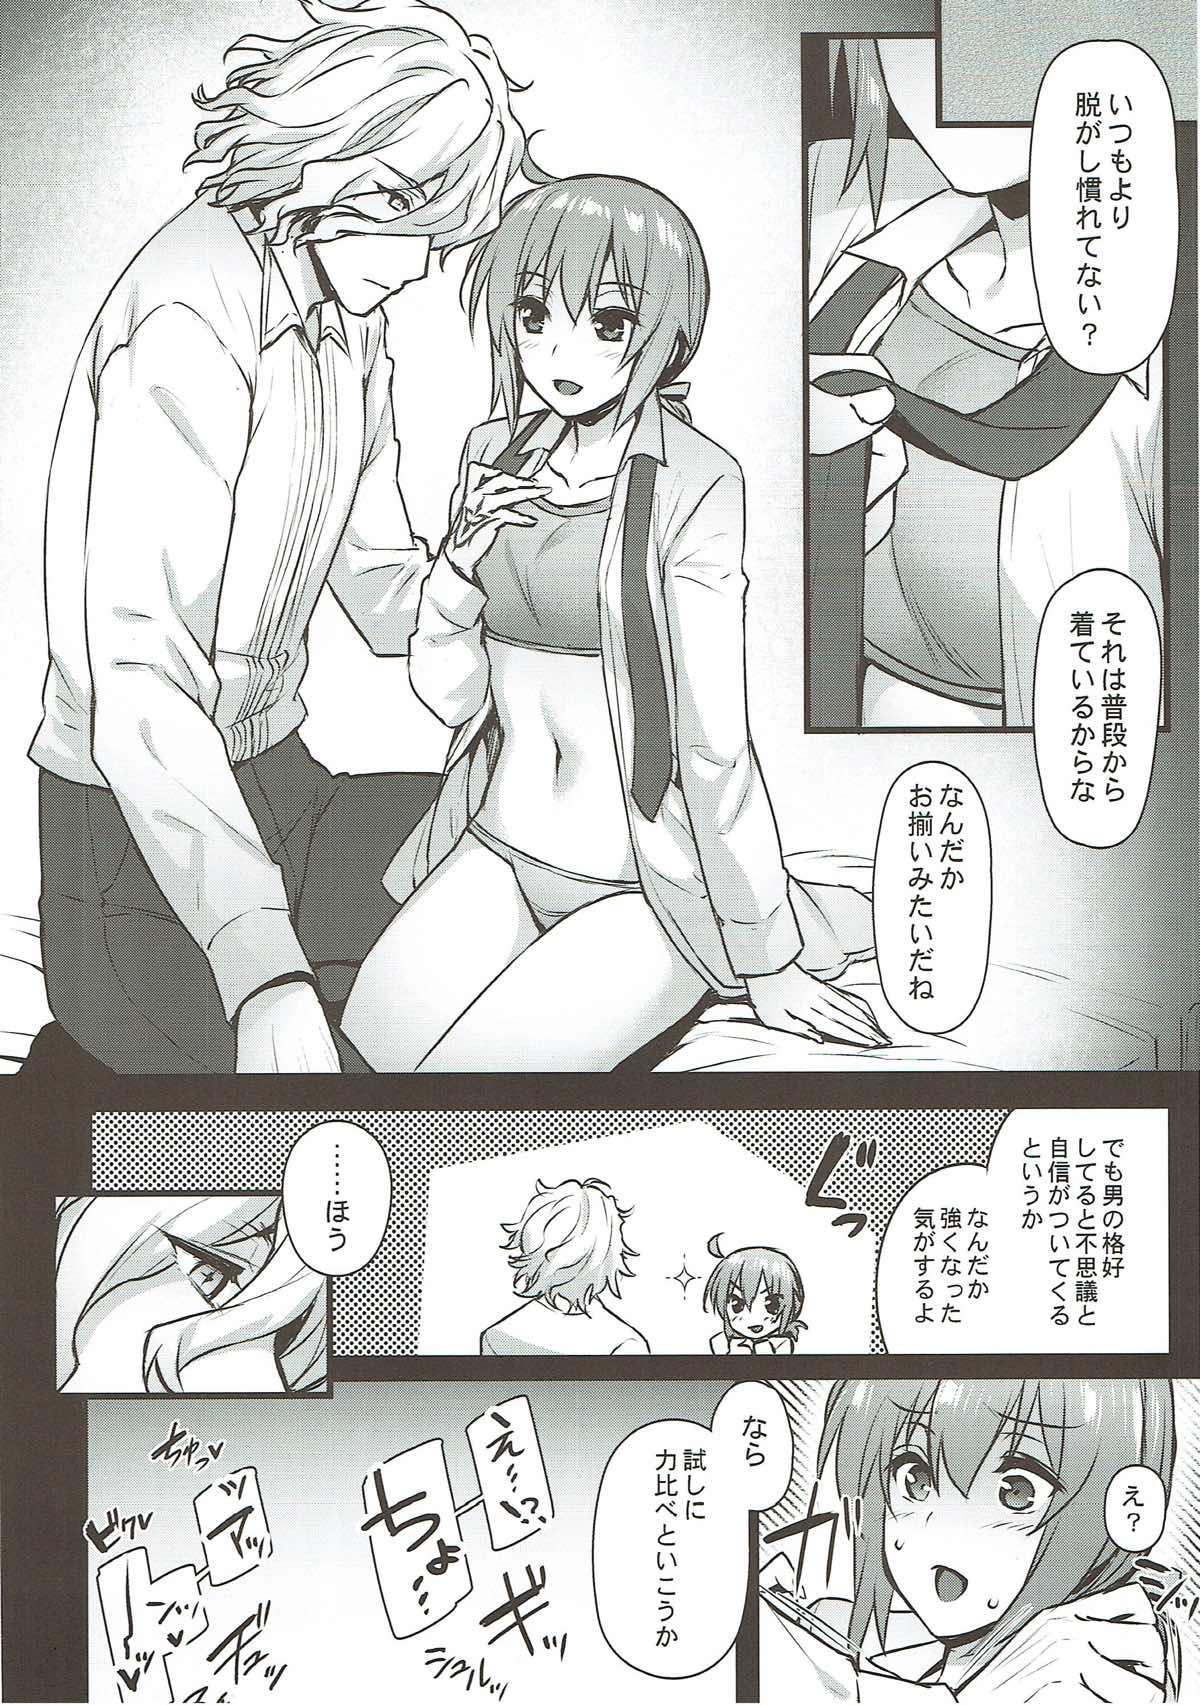 Audition Kyouhansha BOX - Fate grand order Muscular - Page 11